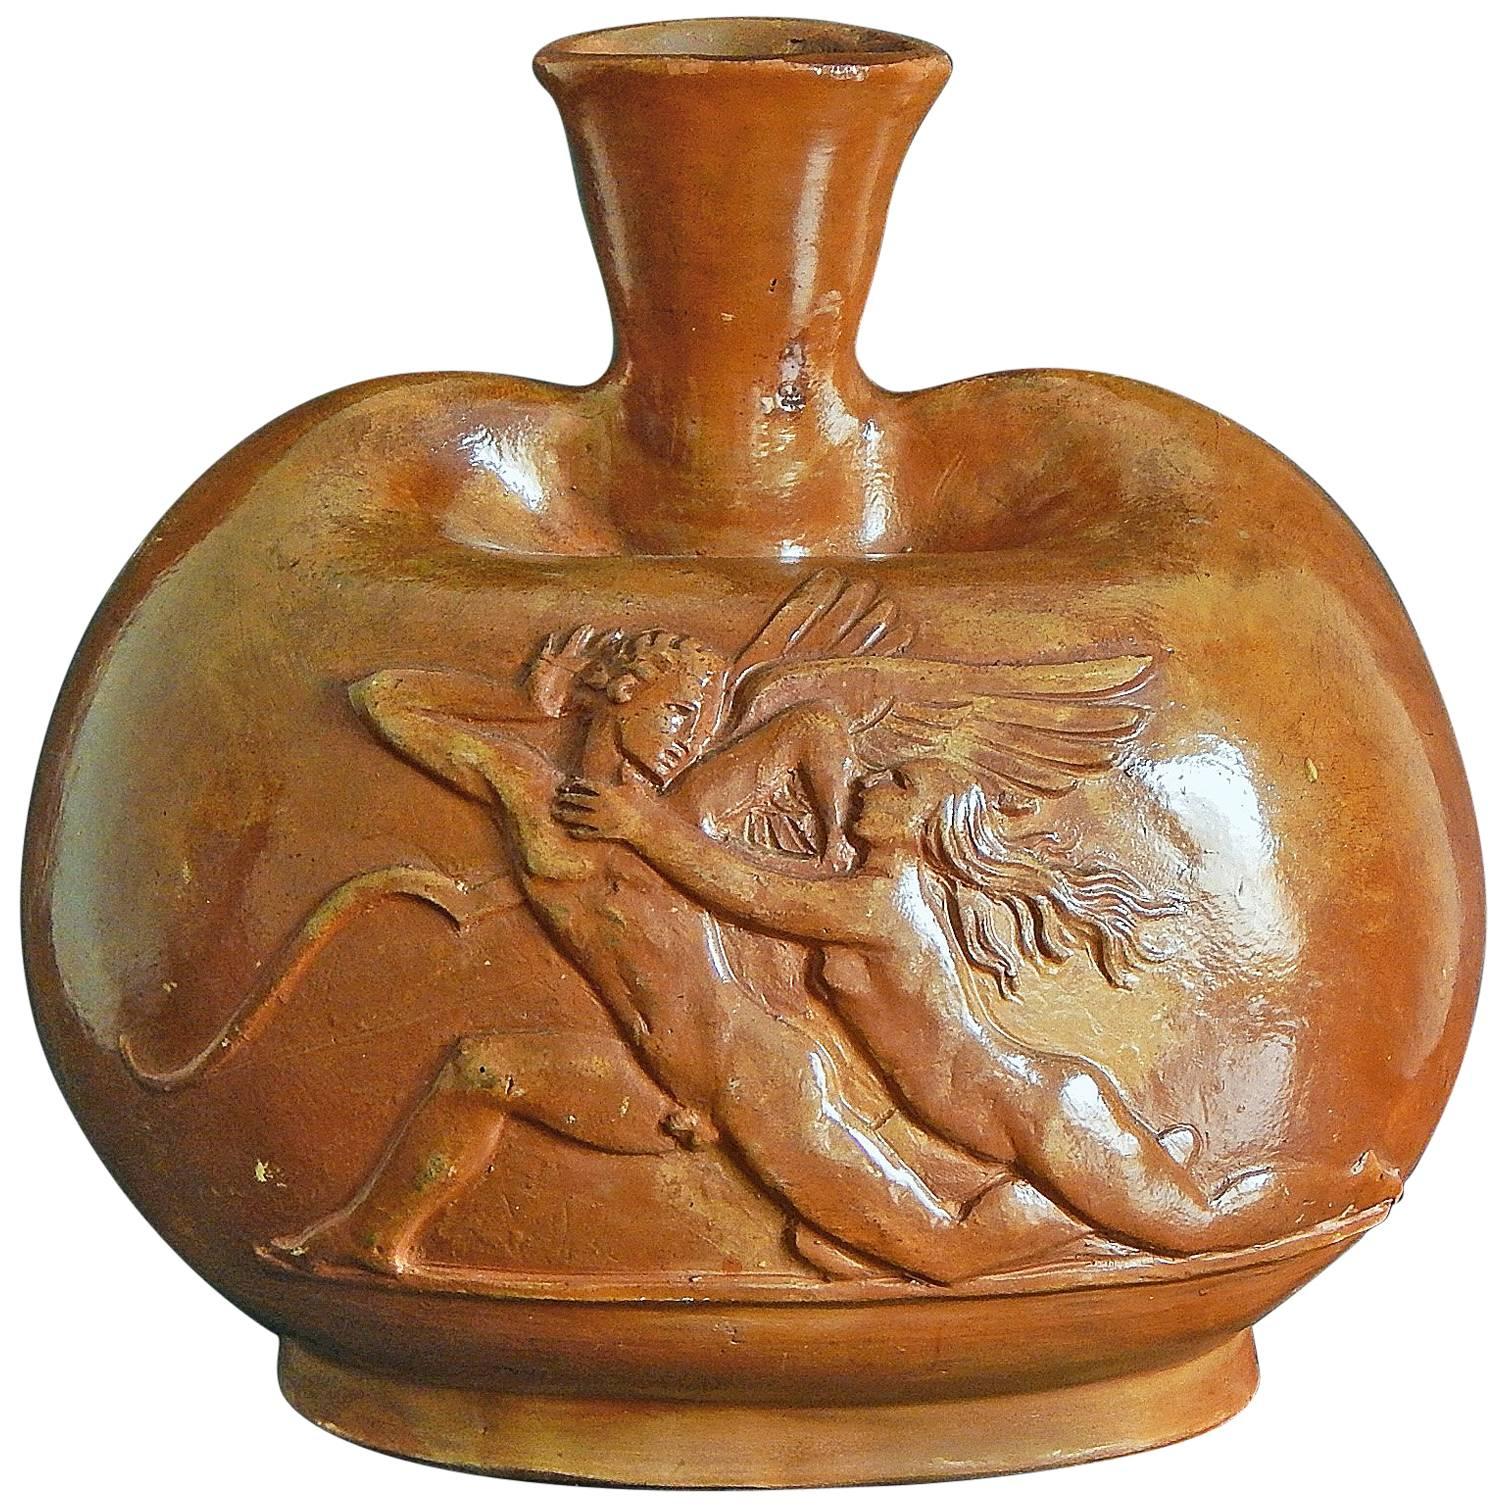 "Psyche Imploring Cupid, " Sculpted Vessel with Nudes by Bregnoe, Art Deco Master